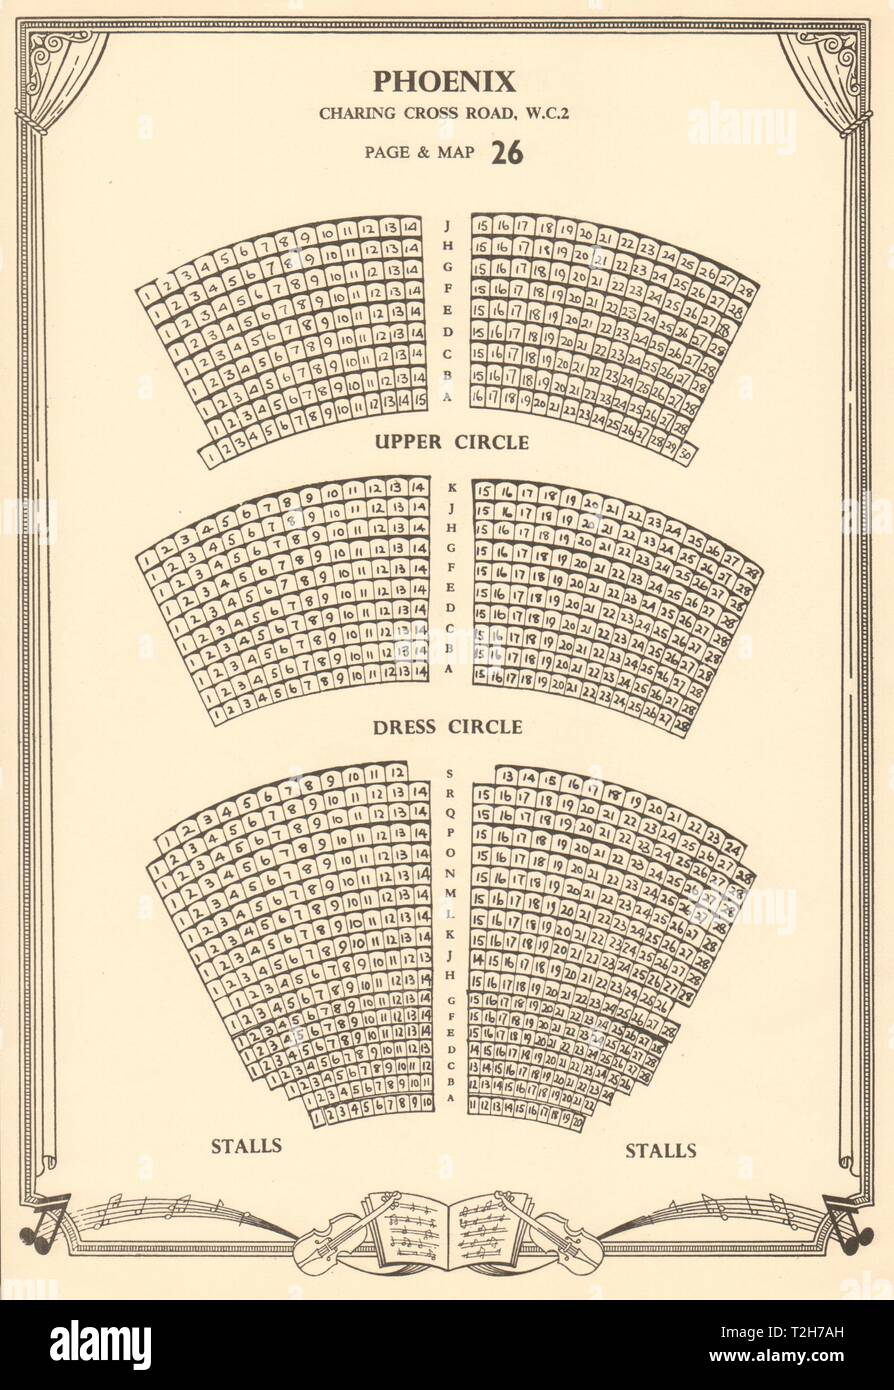 Centrepointe Theatre Seating Chart